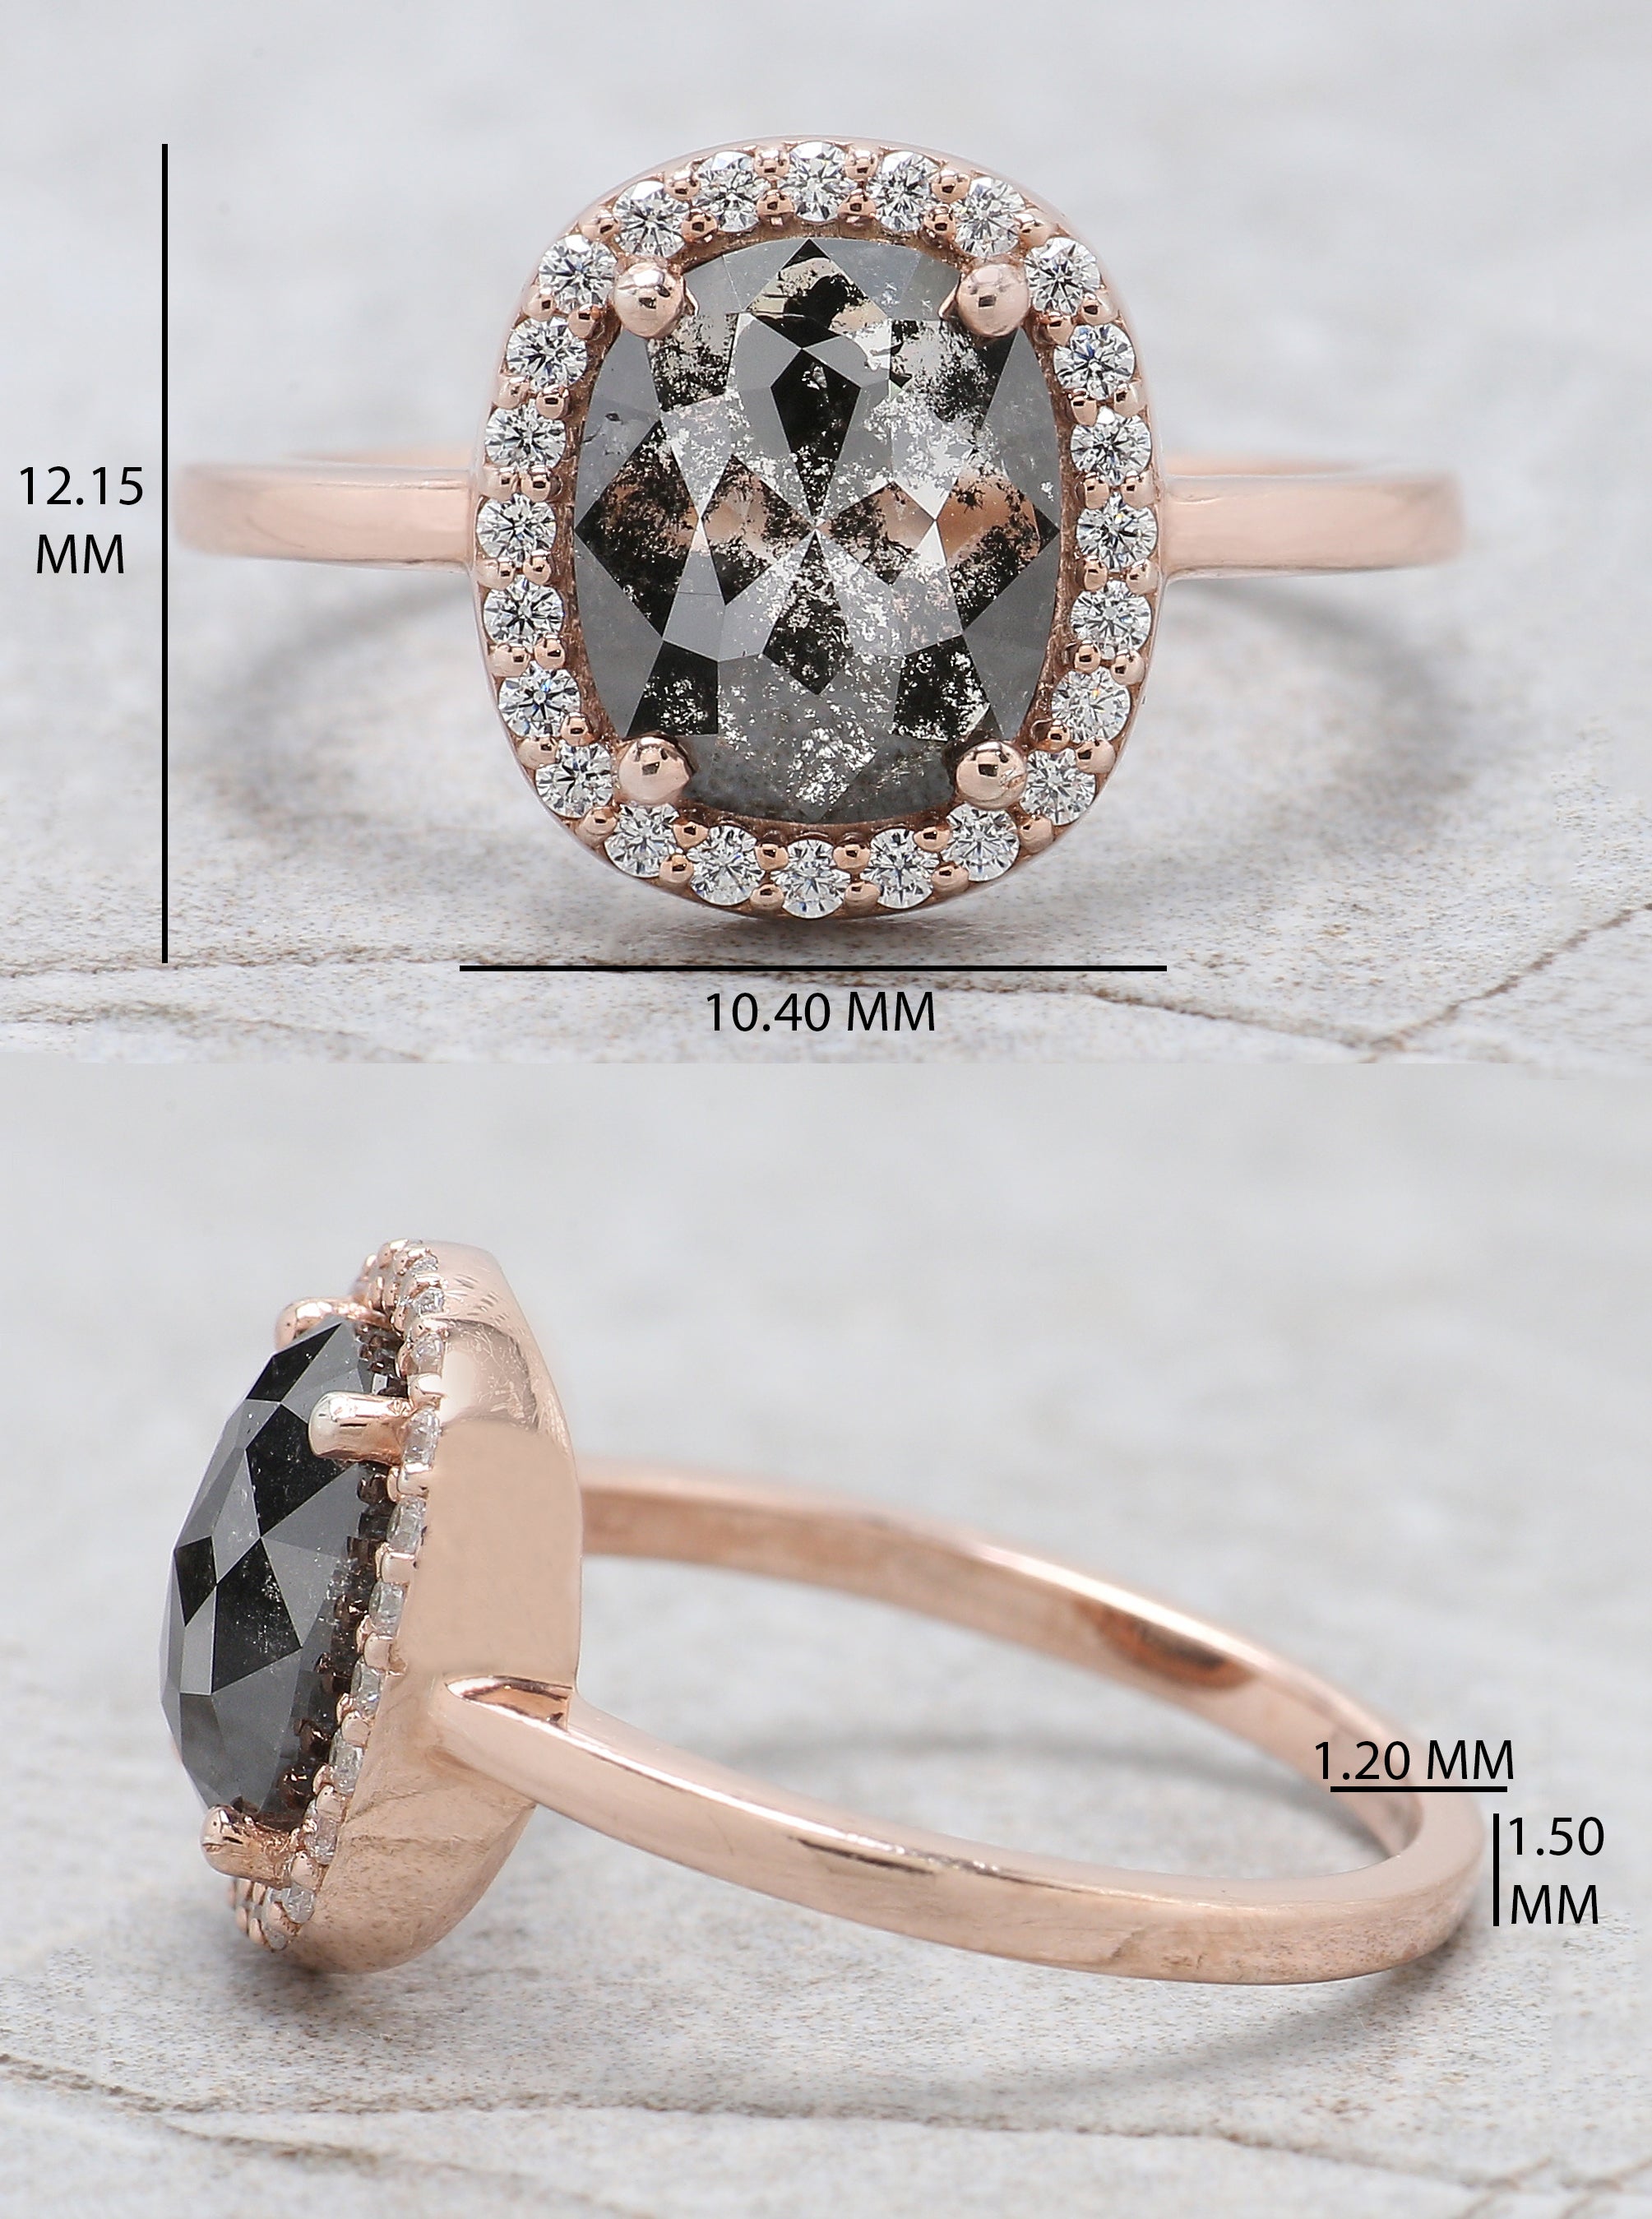 Oval Cut Salt And Pepper Diamond Ring 2.22 Ct 8.74 MM Oval Diamond Ring 14K Solid Rose Gold Silver Oval Engagement Ring Gift For Her QL2070